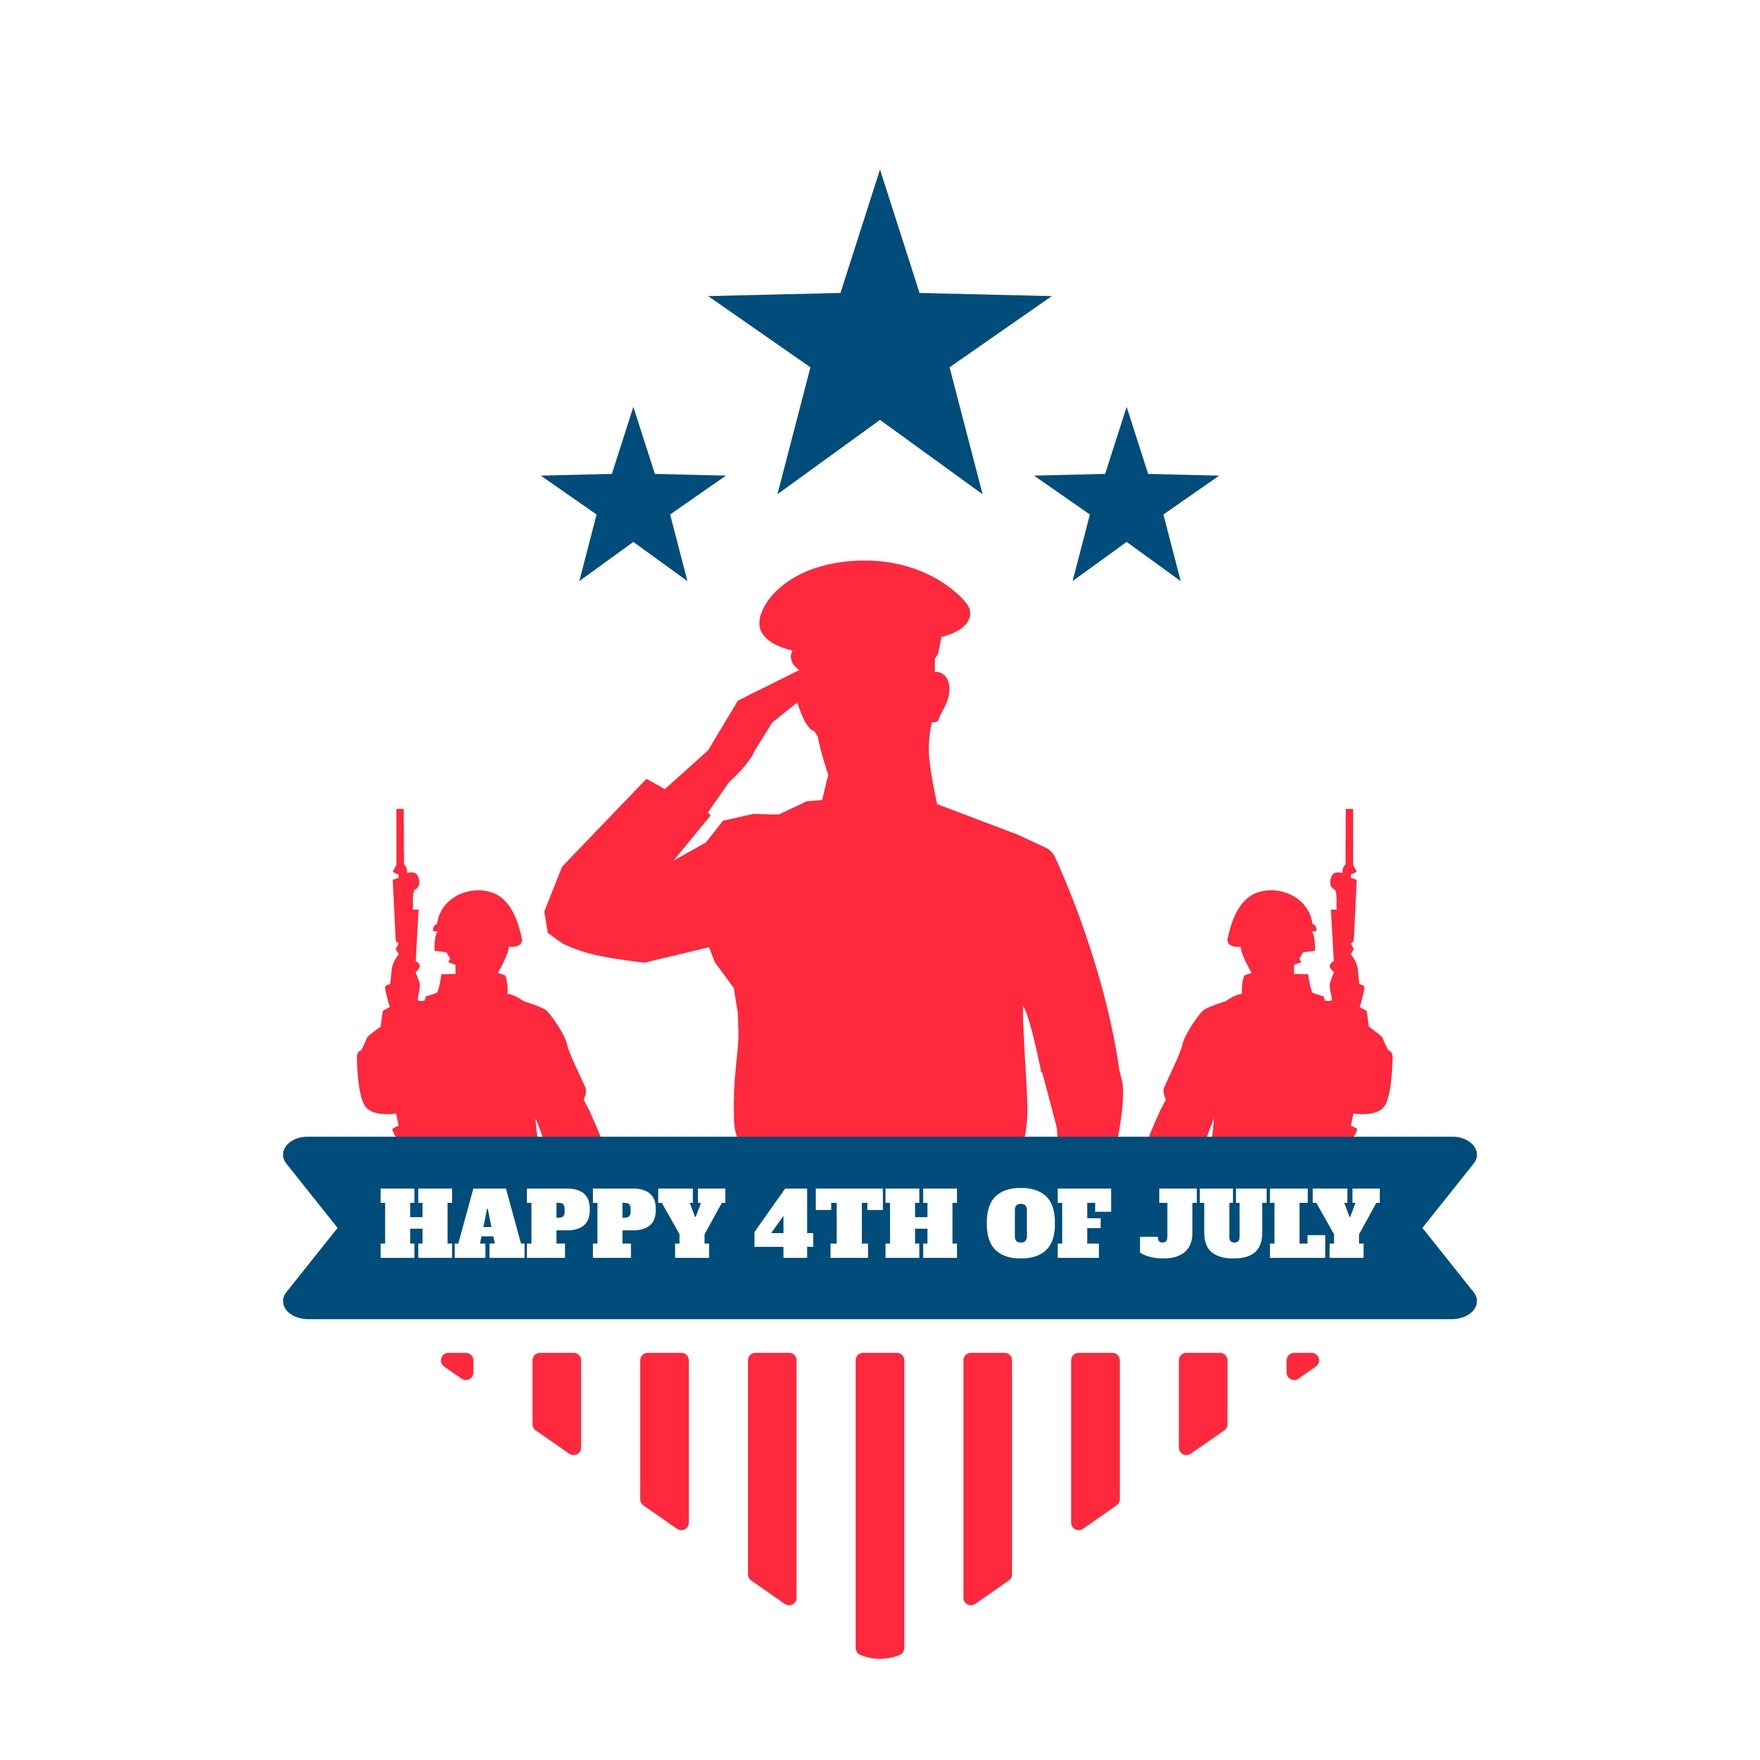 Free Military Happy 4th Of July Gif in Illustrator, EPS, SVG, JPG, GIF, PNG, After Effects